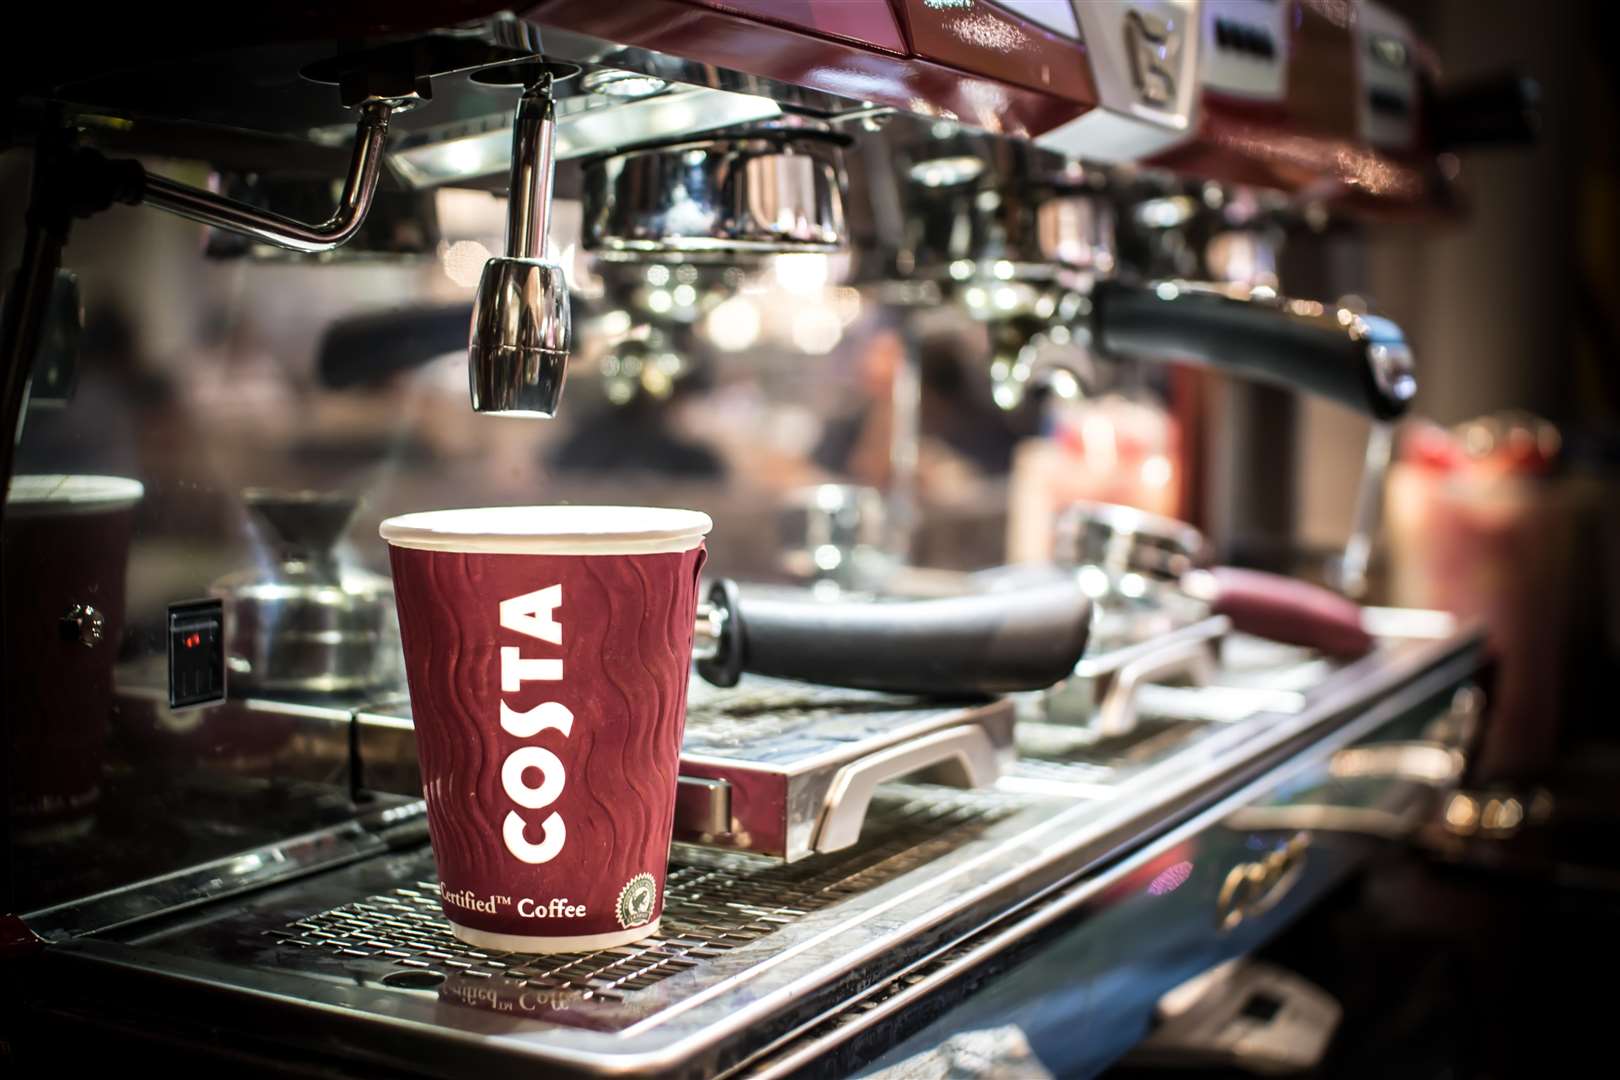 A Costa coffee being prepared